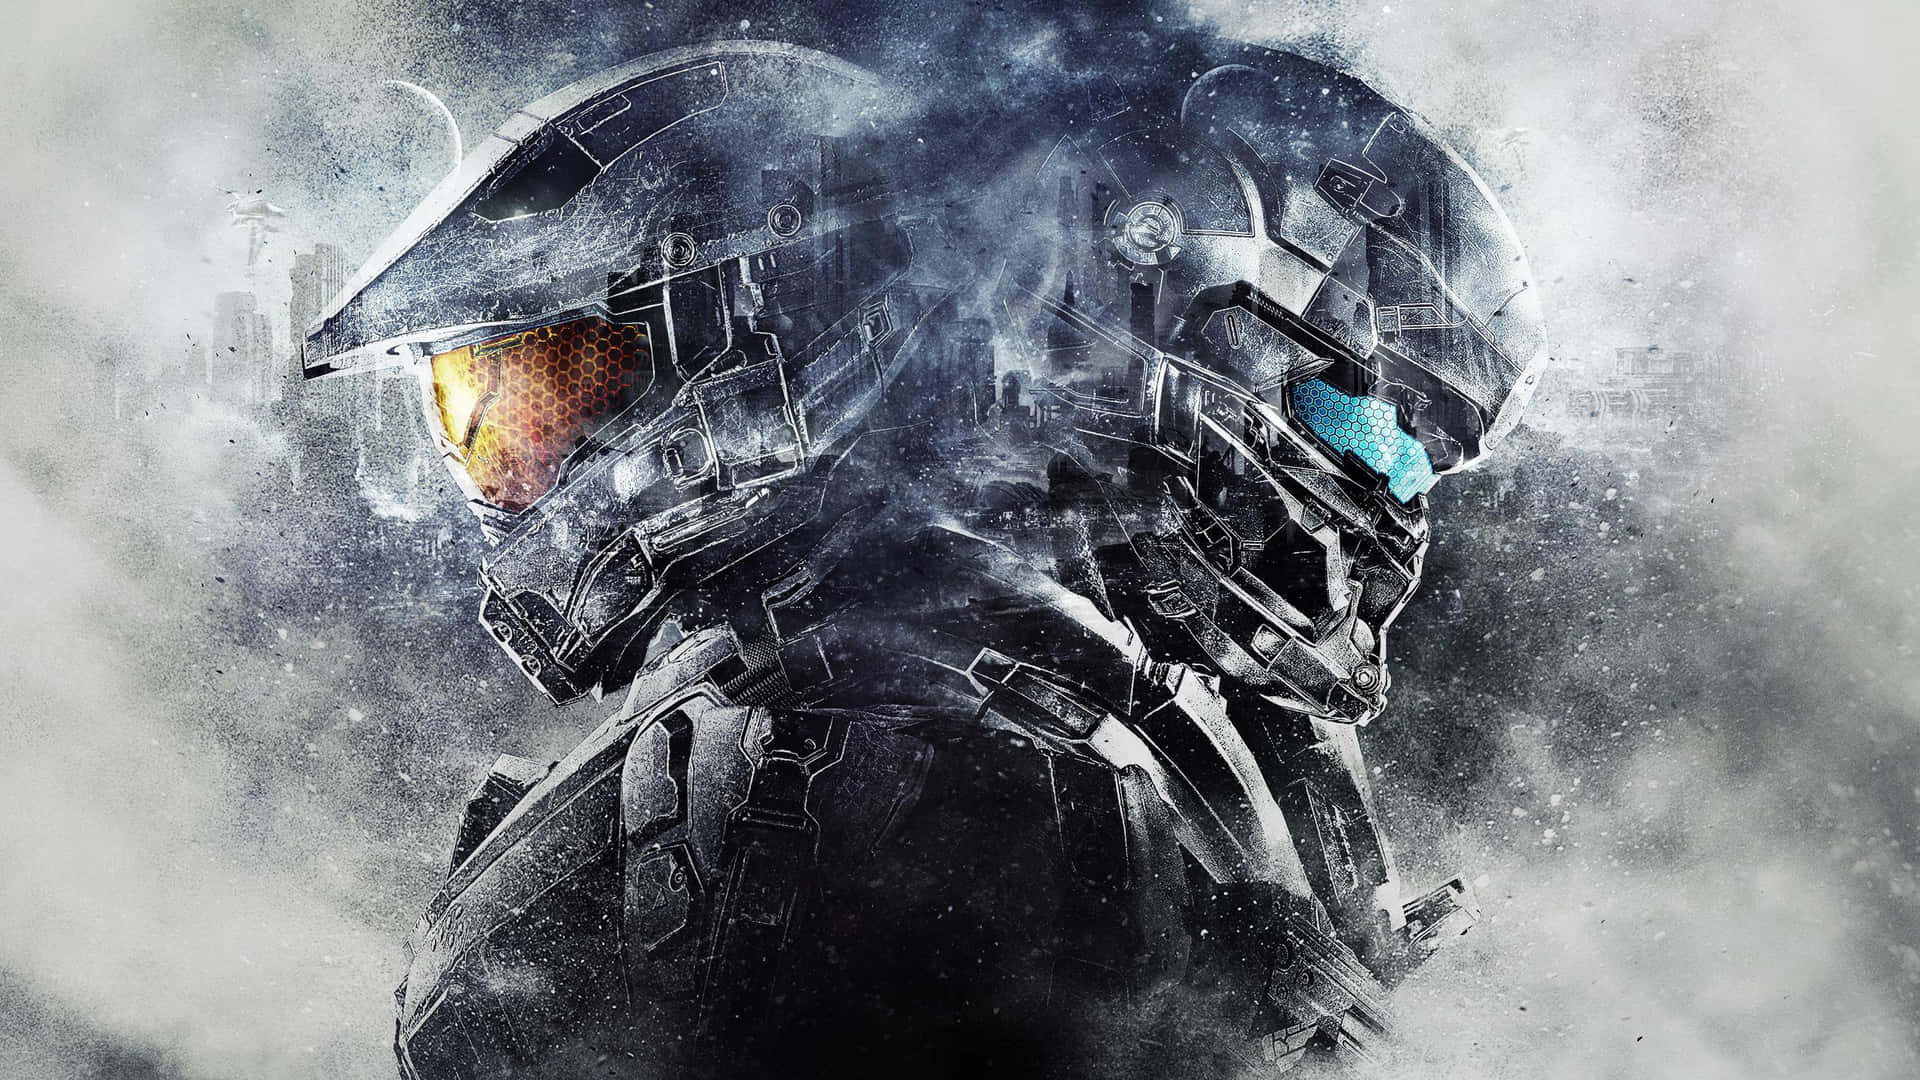 Epic Battle - Halo Spartans in Action Wallpaper